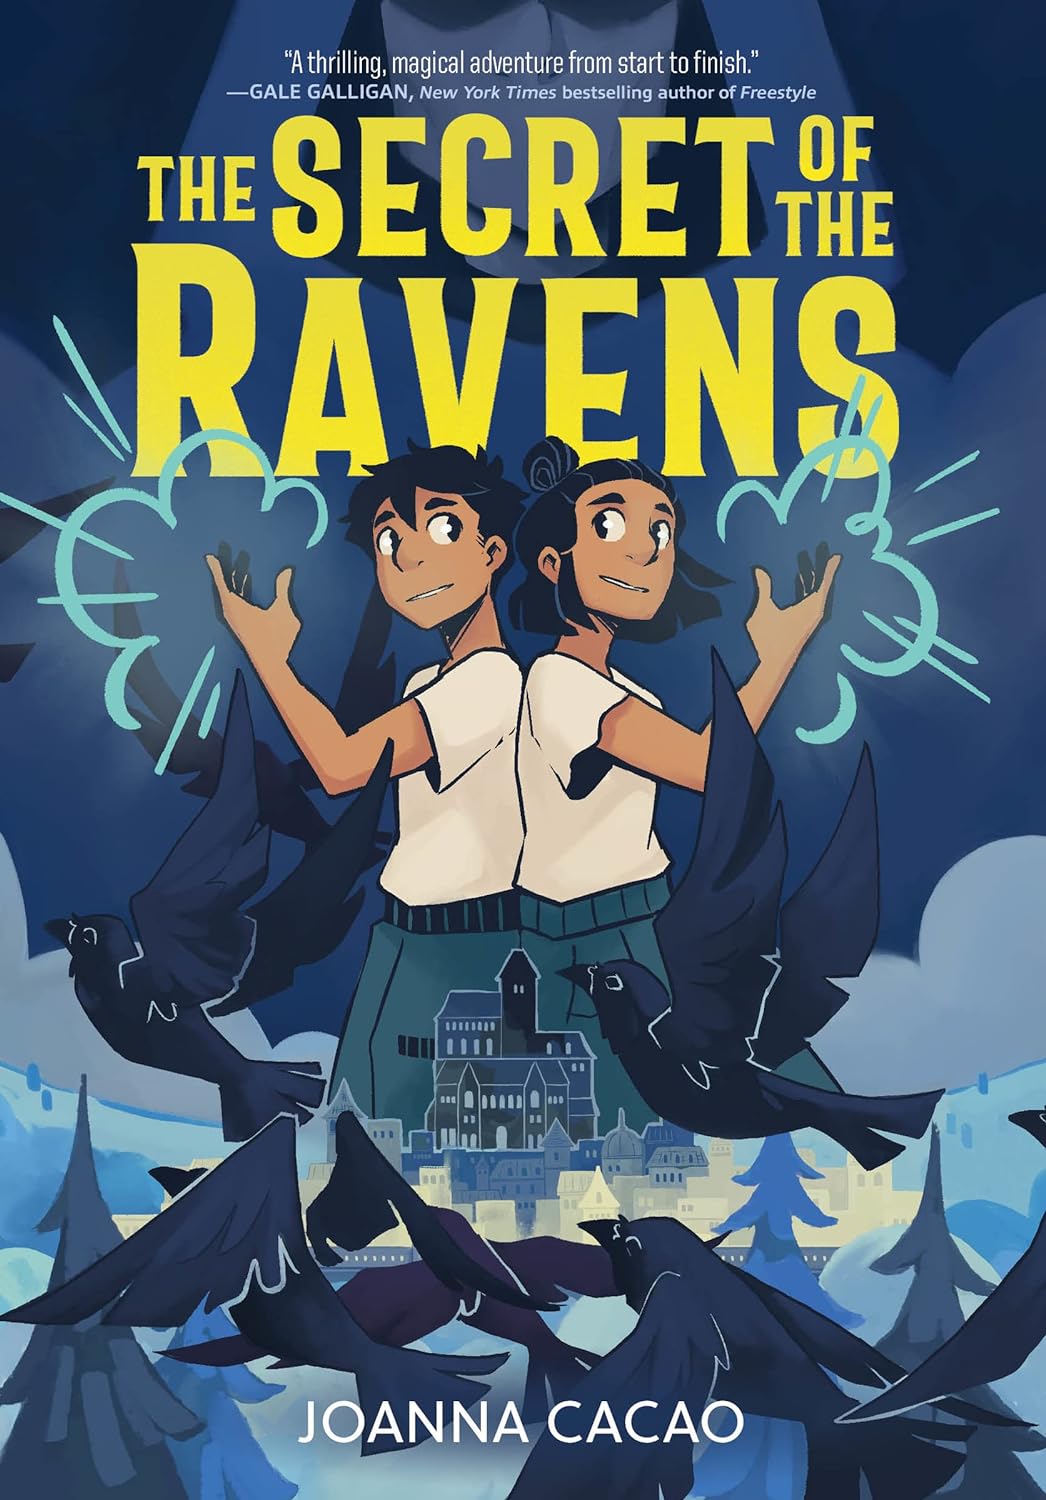 Image for "The Secret of the Ravens"